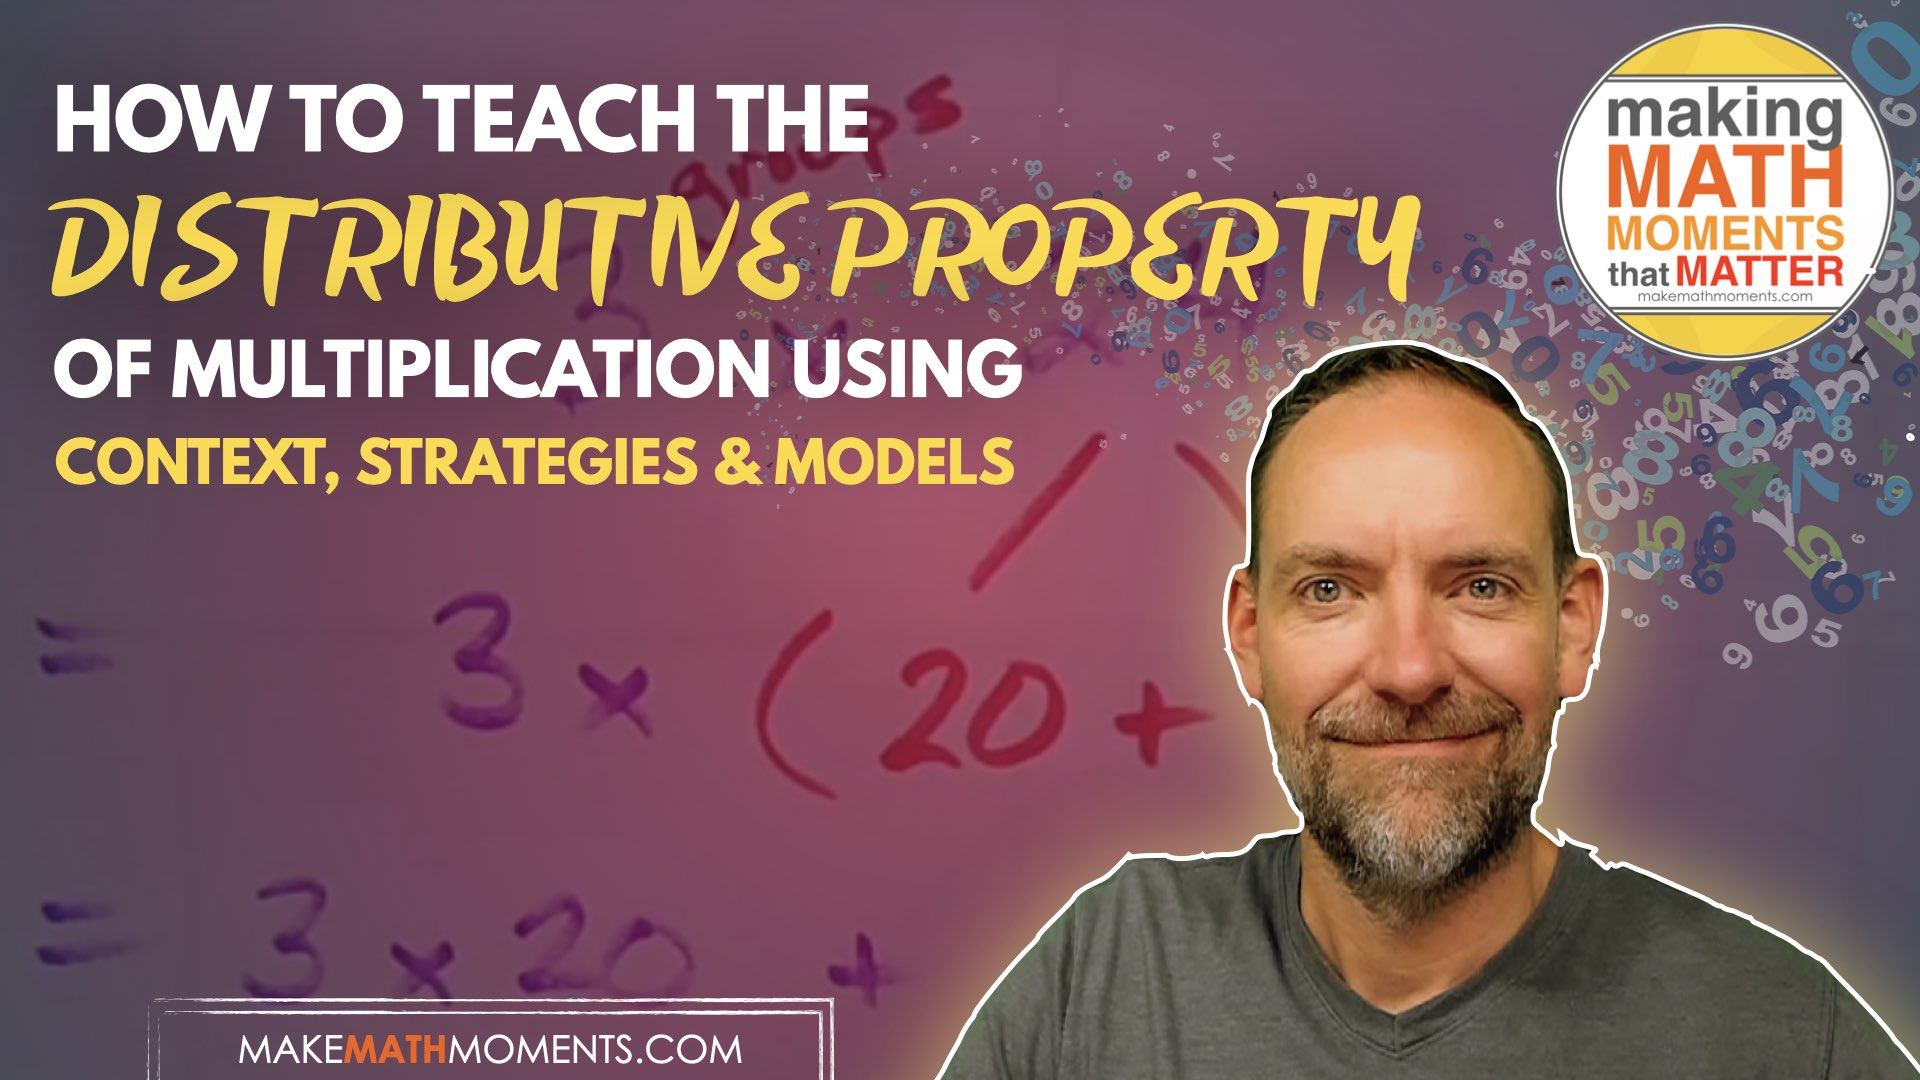 How To Teach The Distributive Property of Multiplication Using Context, Strategies and Models